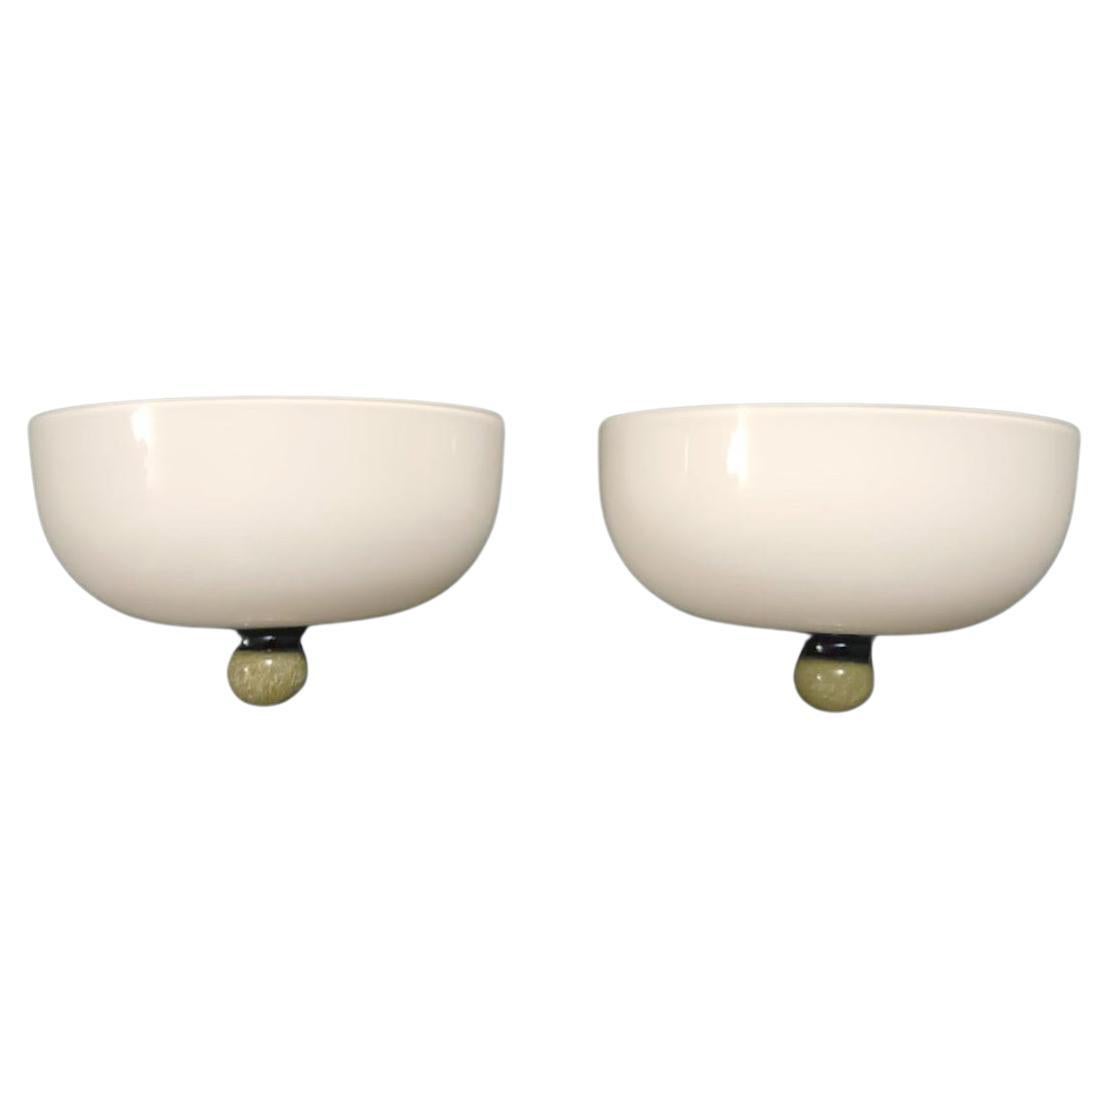 Pair of Murano Uplight Sconces For Sale